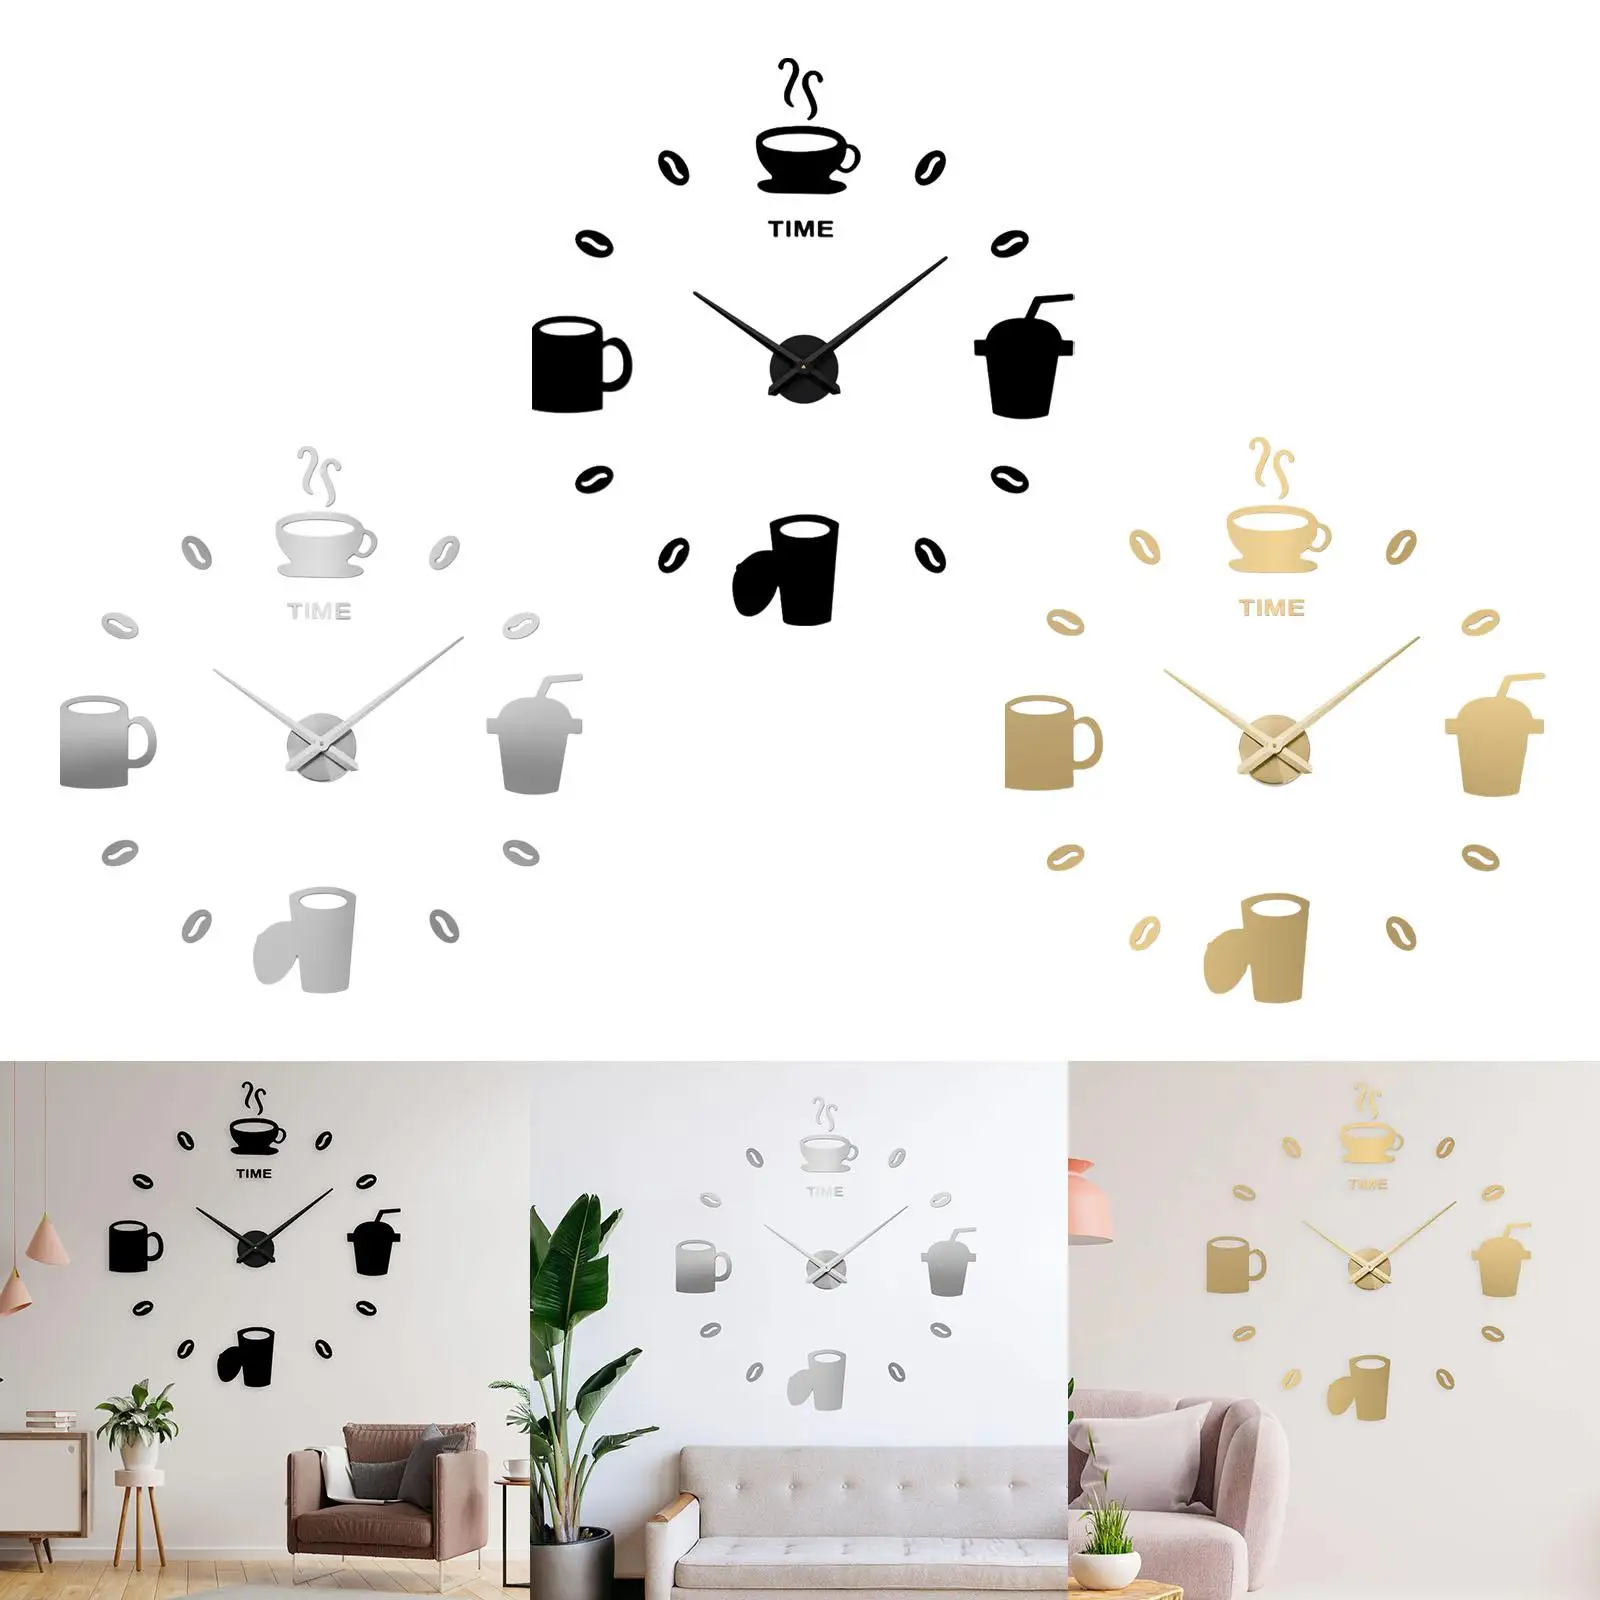 Acrylic DIY Wall Clock Stickers Frameless Battery Operated Silent Round Battery Powered Office Kitchen Home Bedroom Decor